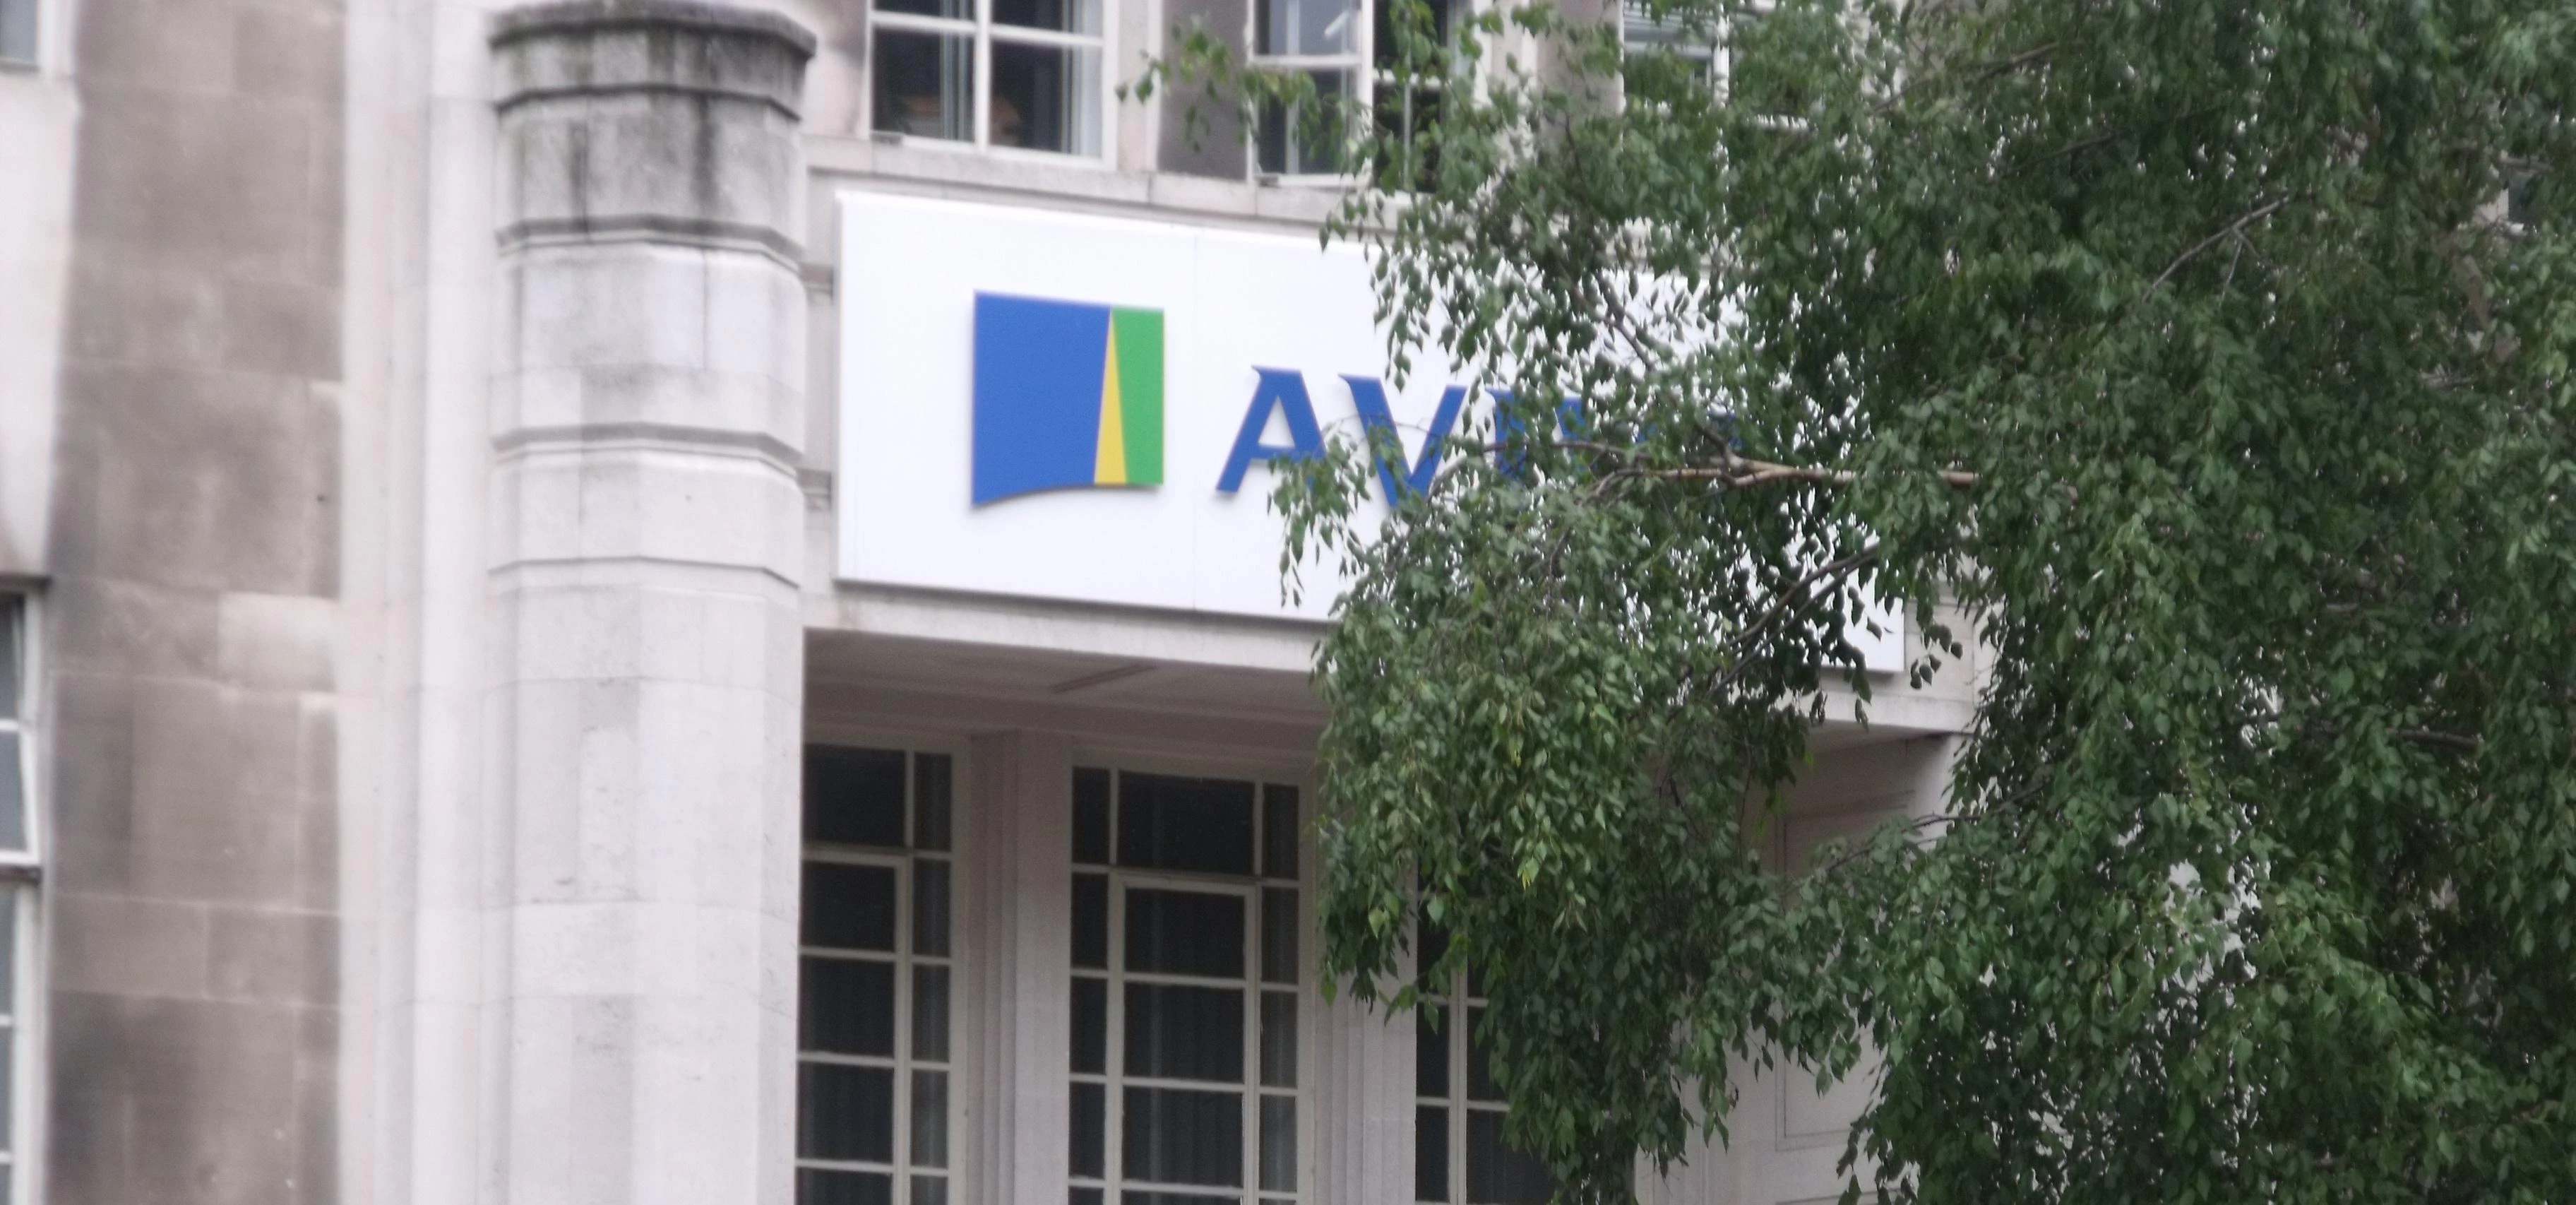 Lombard House, Great Charles Street Queensway - Aviva - signs